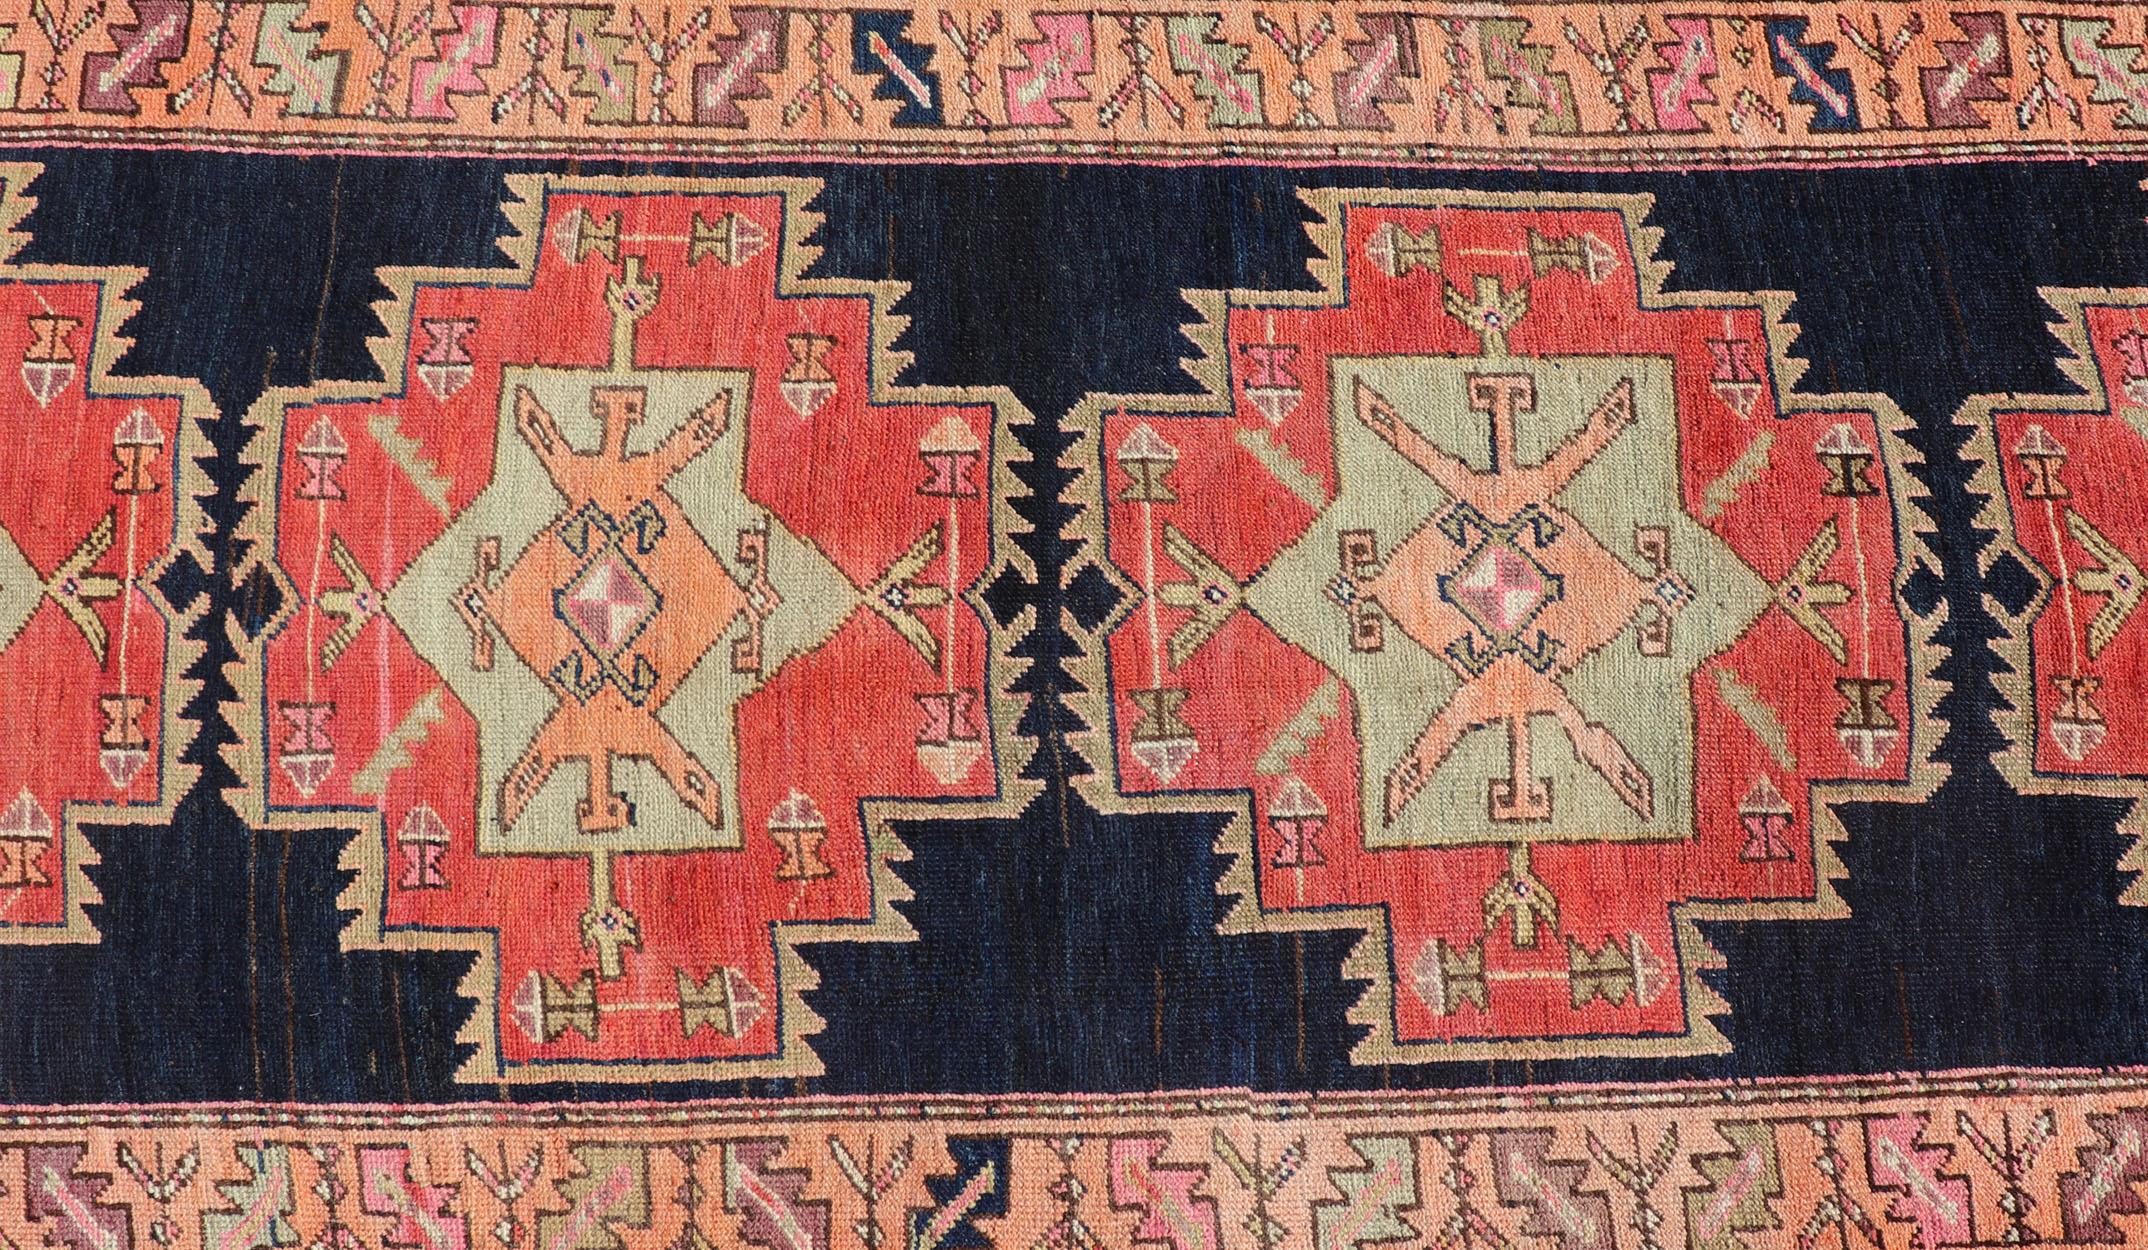 This antique Persian Azerbaijan styled runner has been hand-knotted in wool. The rug features a sub-geometric medallion design, and is enclosed within a complementary, multi-tiered border. Rendered in multicolor, the rug has been made into a great